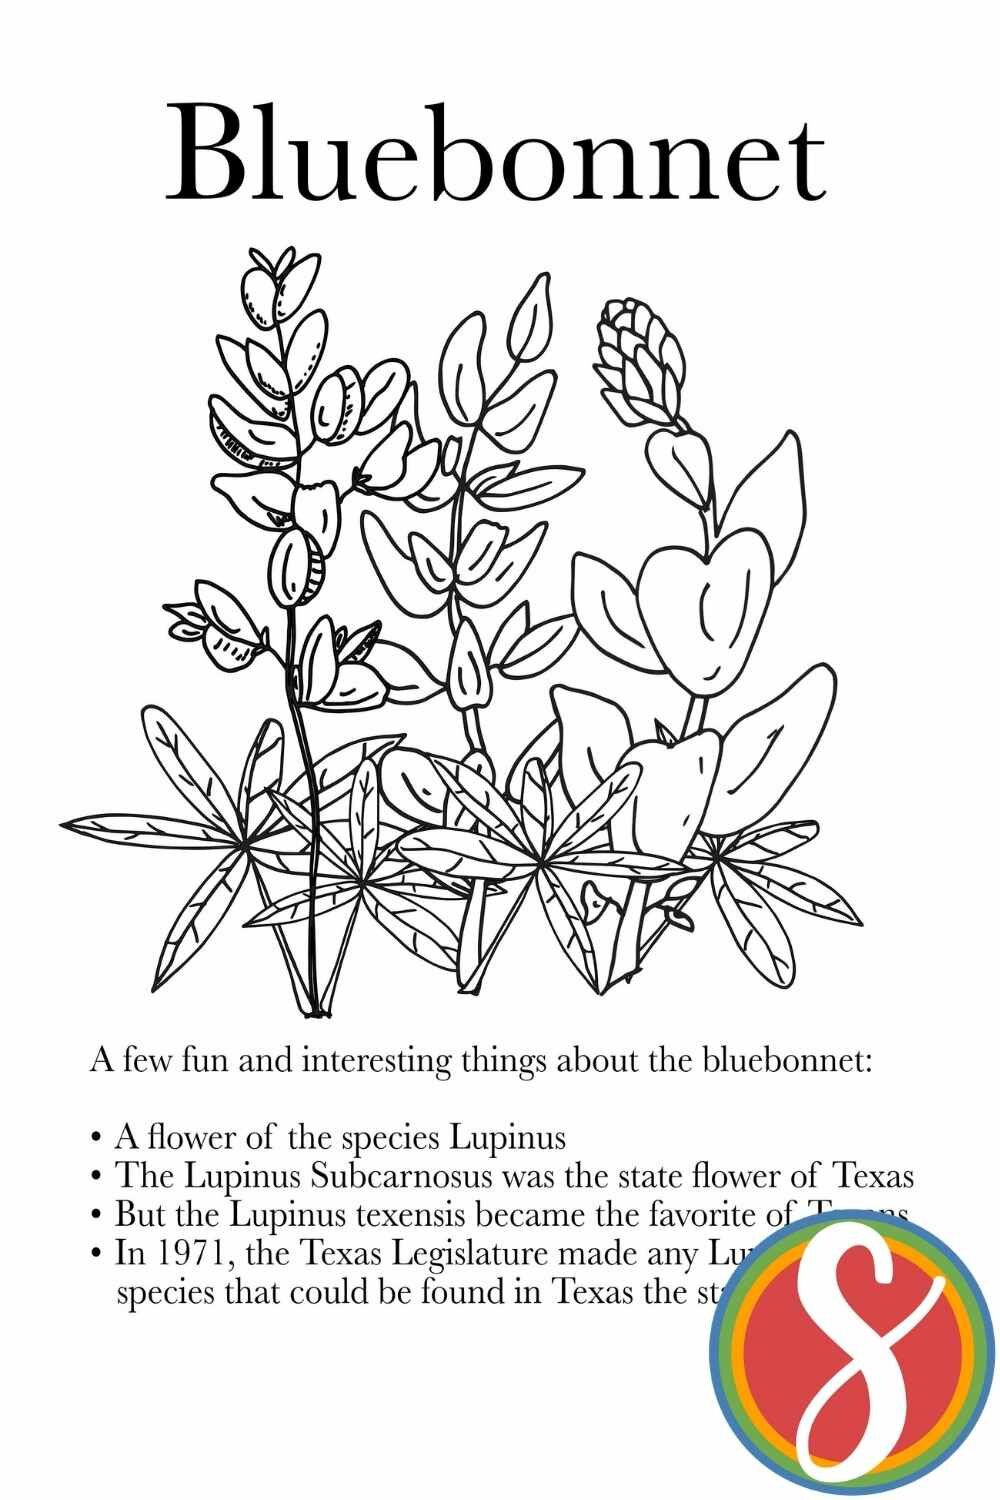 Bluebonnet facts printable coloring from Stevie Doodles